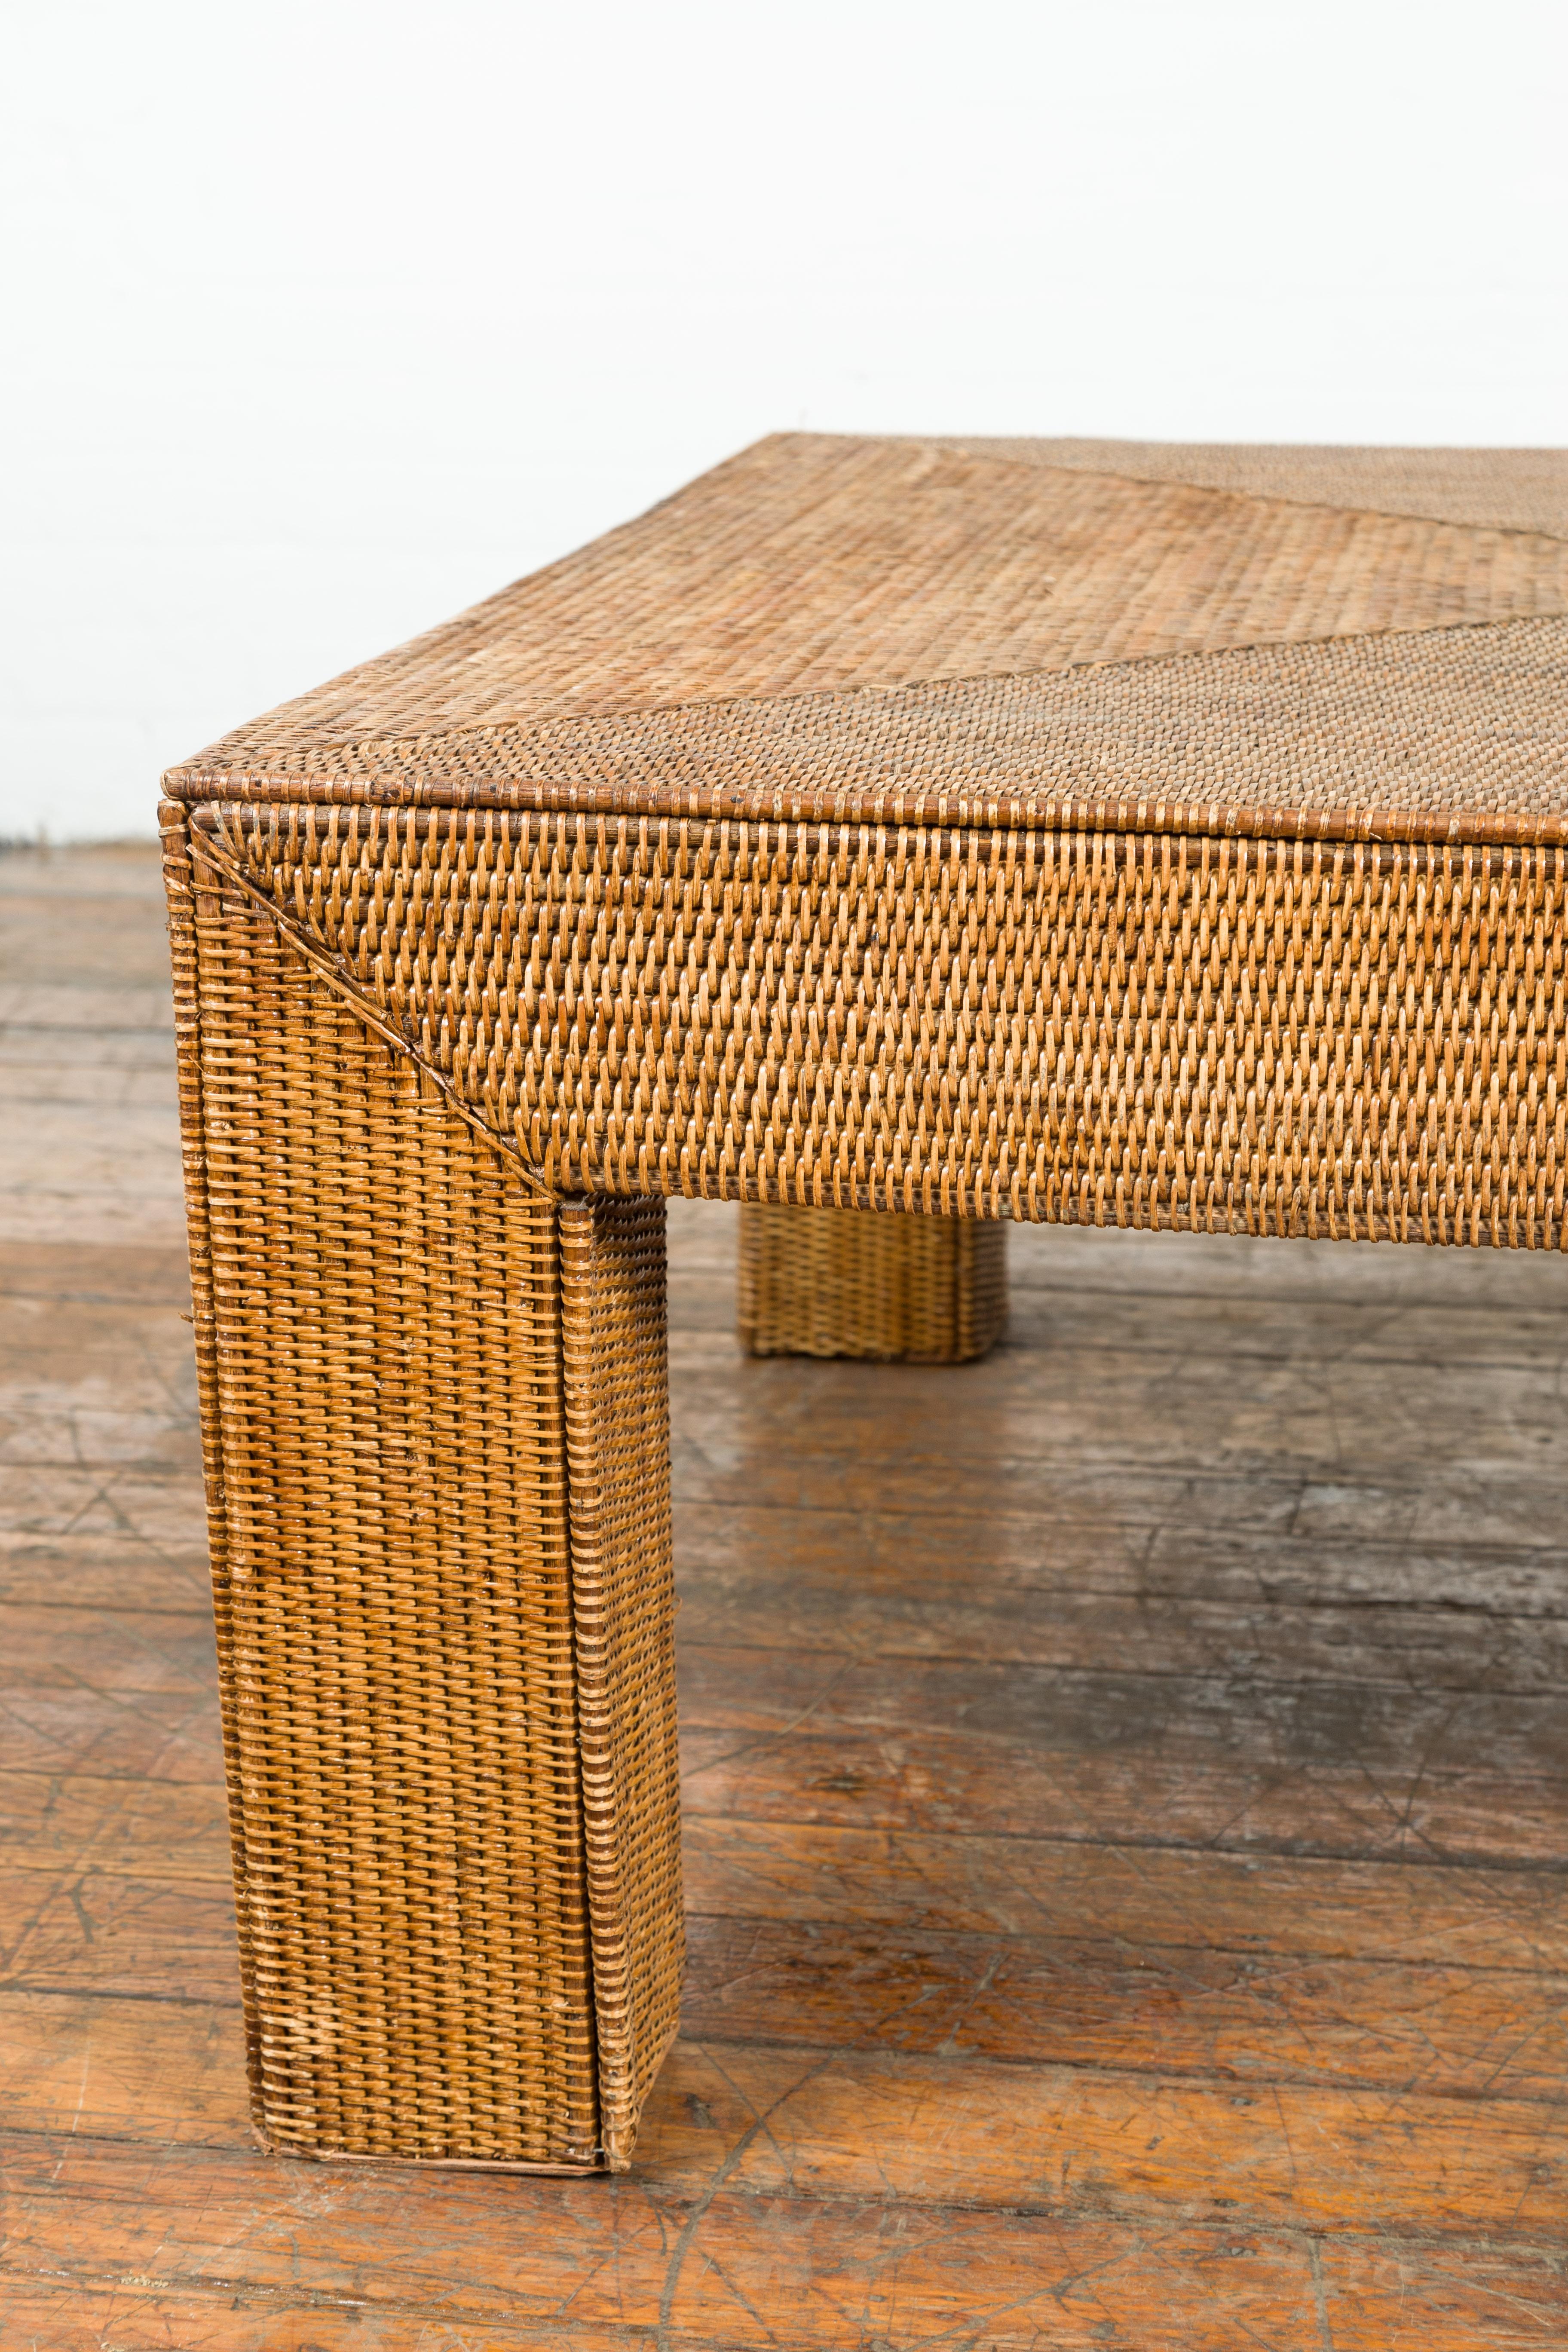 Burmese Vintage Rattan Parsons Leg Coffee Table Hand-Stitched over Wood In Good Condition For Sale In Yonkers, NY